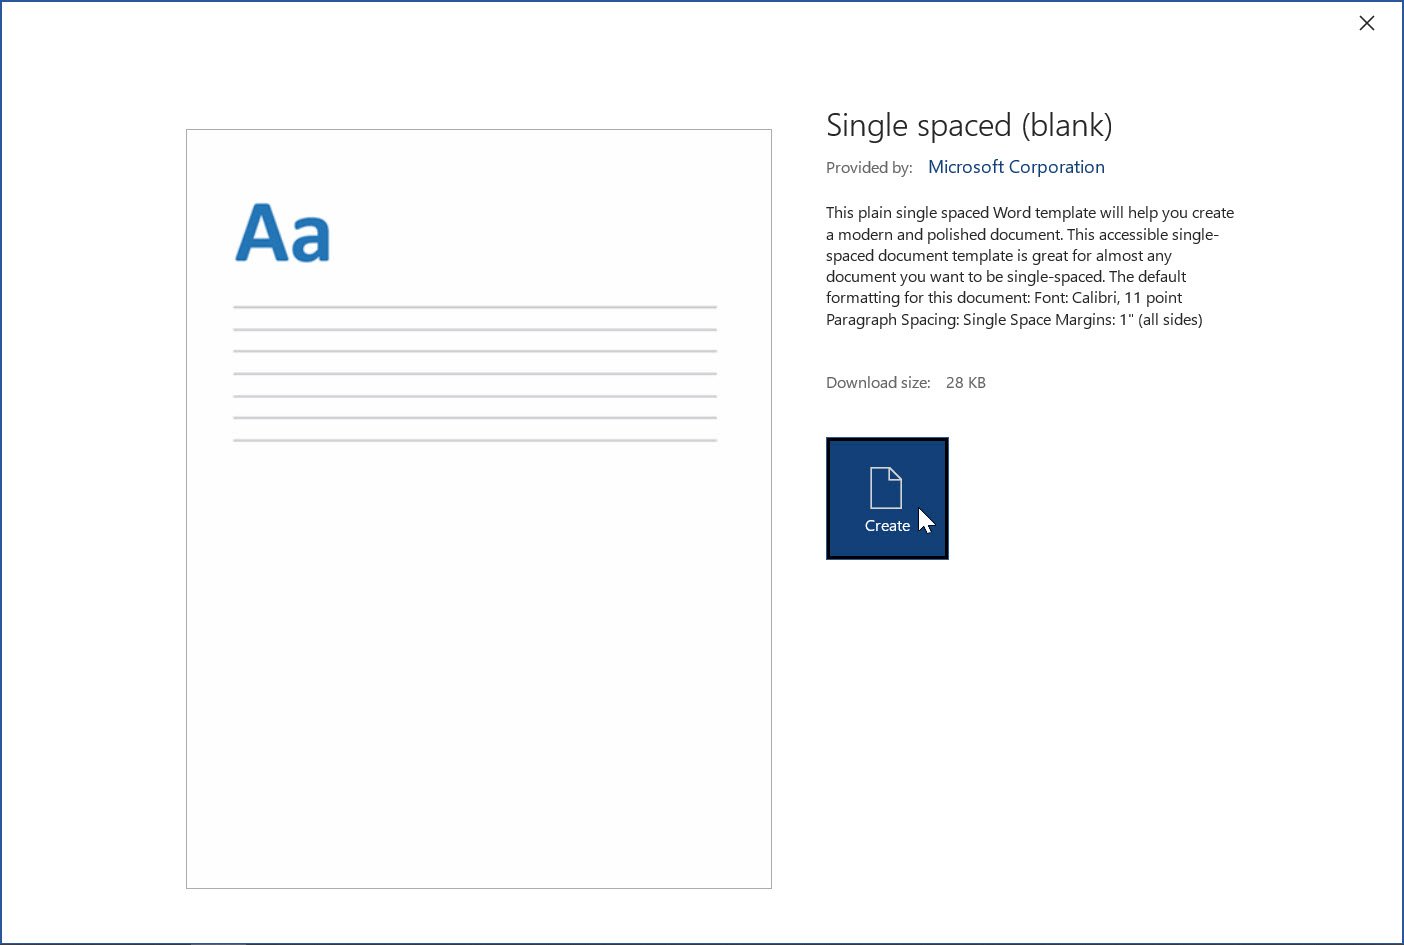 Create new blank document using Single spaced (blank) template